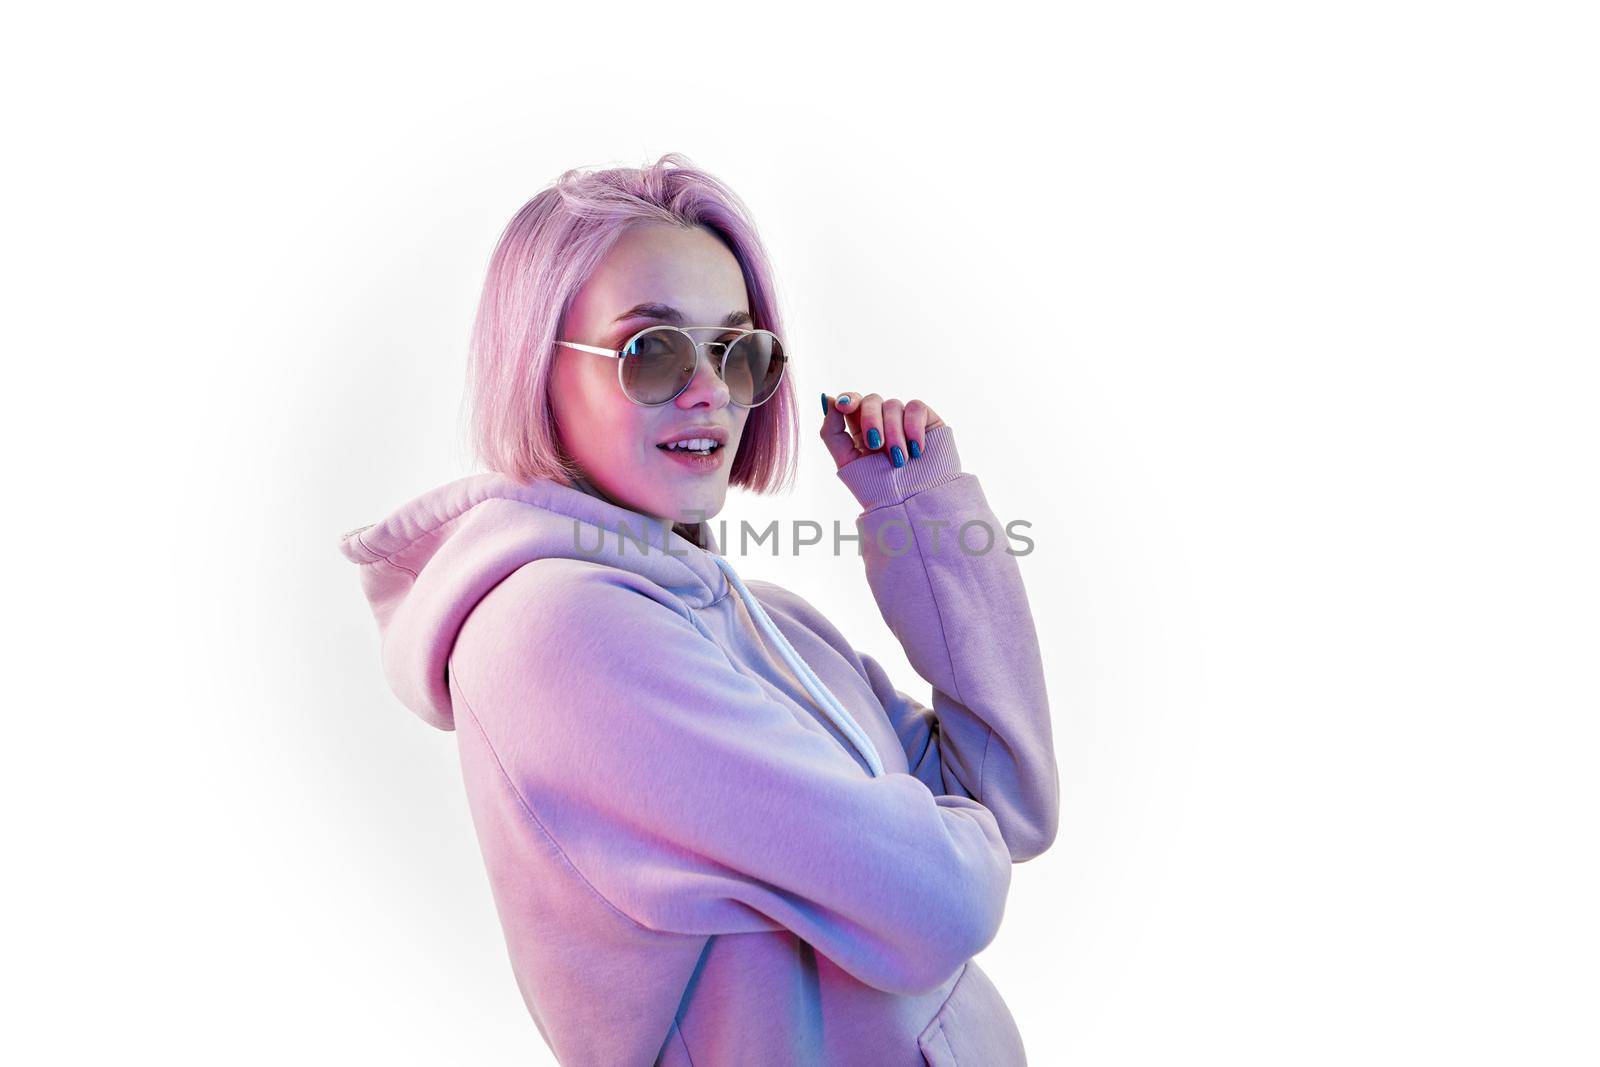 Fashion portrait of beauty young woman with pink bob hairstyle holding on to sunglasses blue nail polish manicure on white background